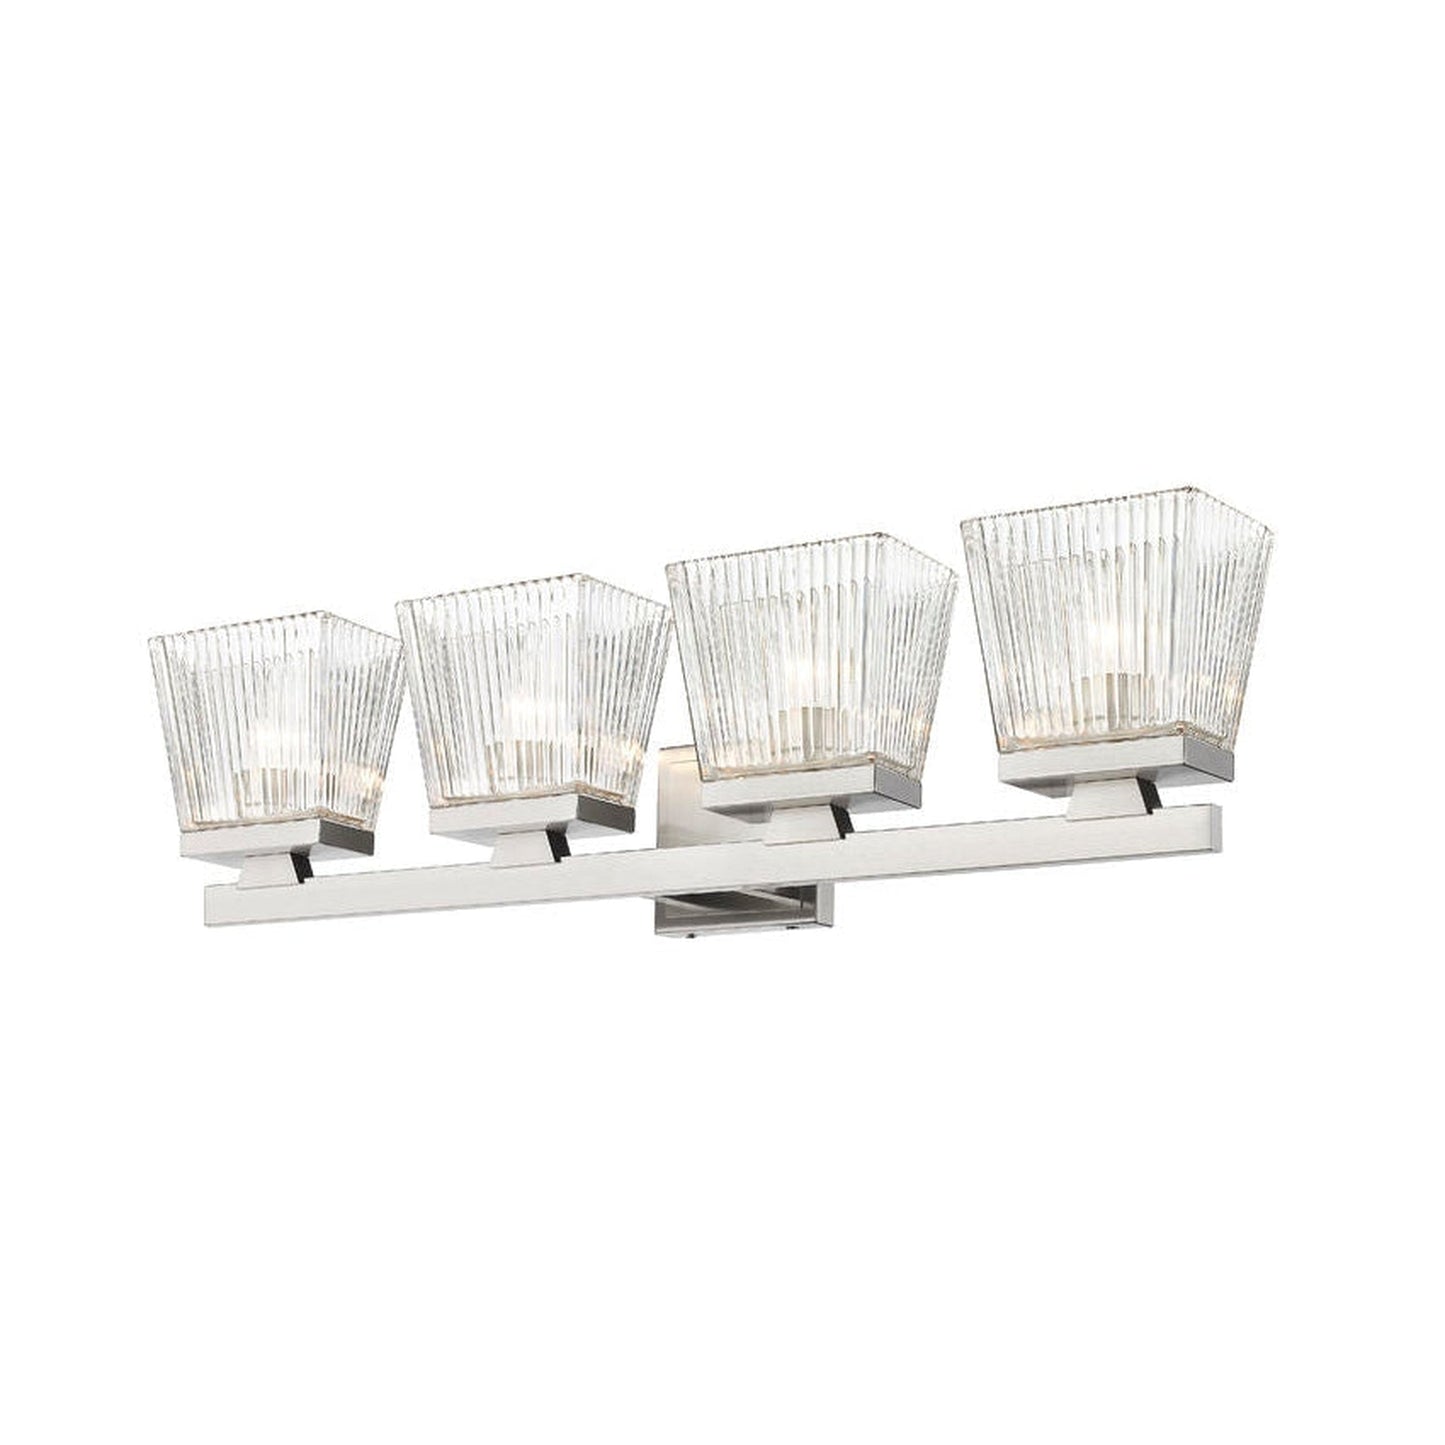 Z-Lite Astor 29" 4-Light Brushed Nickel Vanity Light With Clear Glass Shade